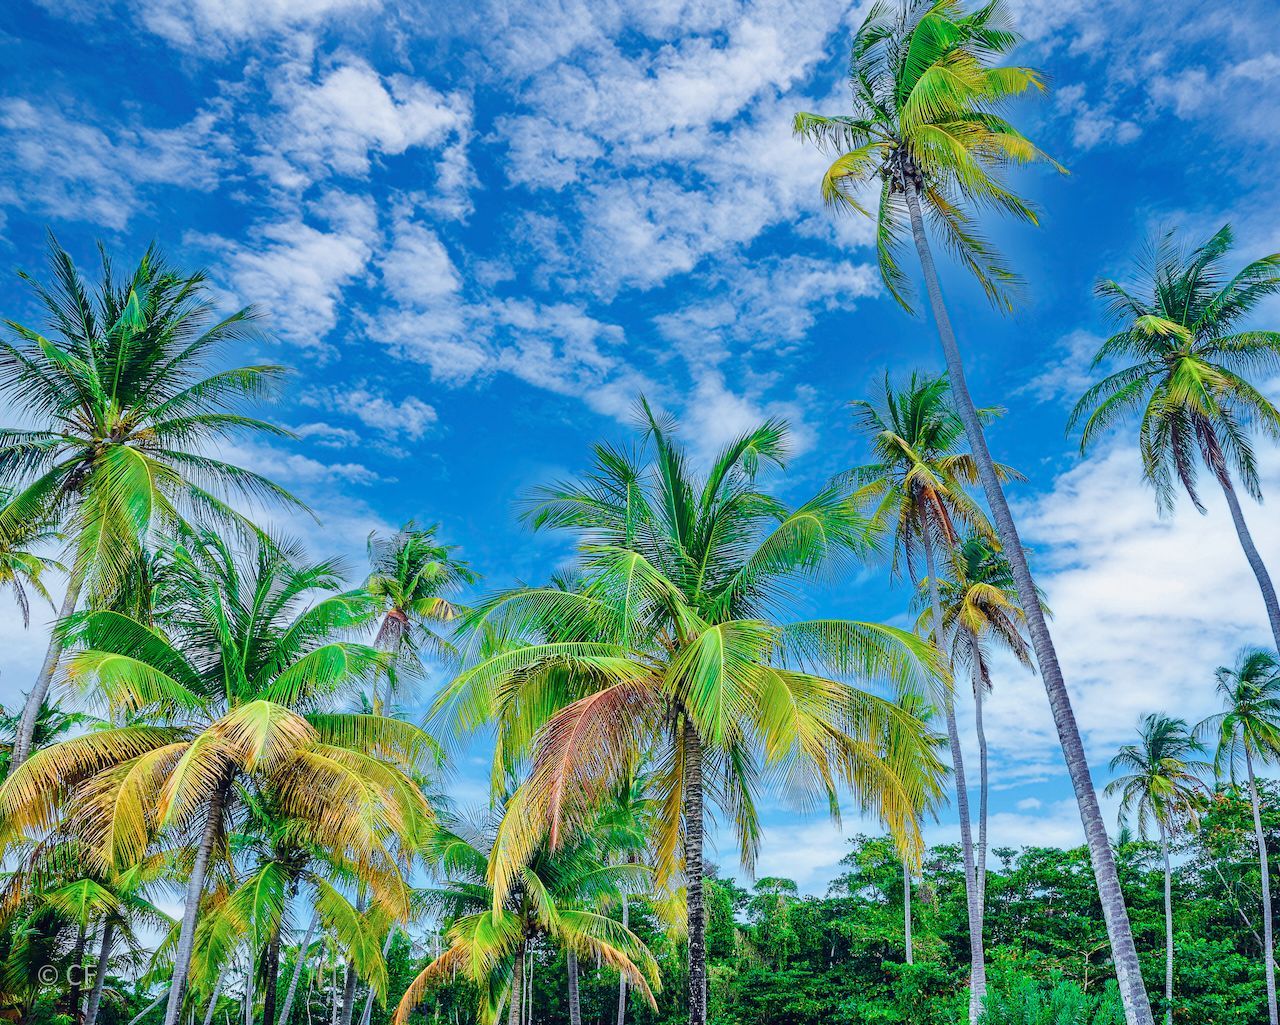 A row of palm trees against a blue sky with clouds